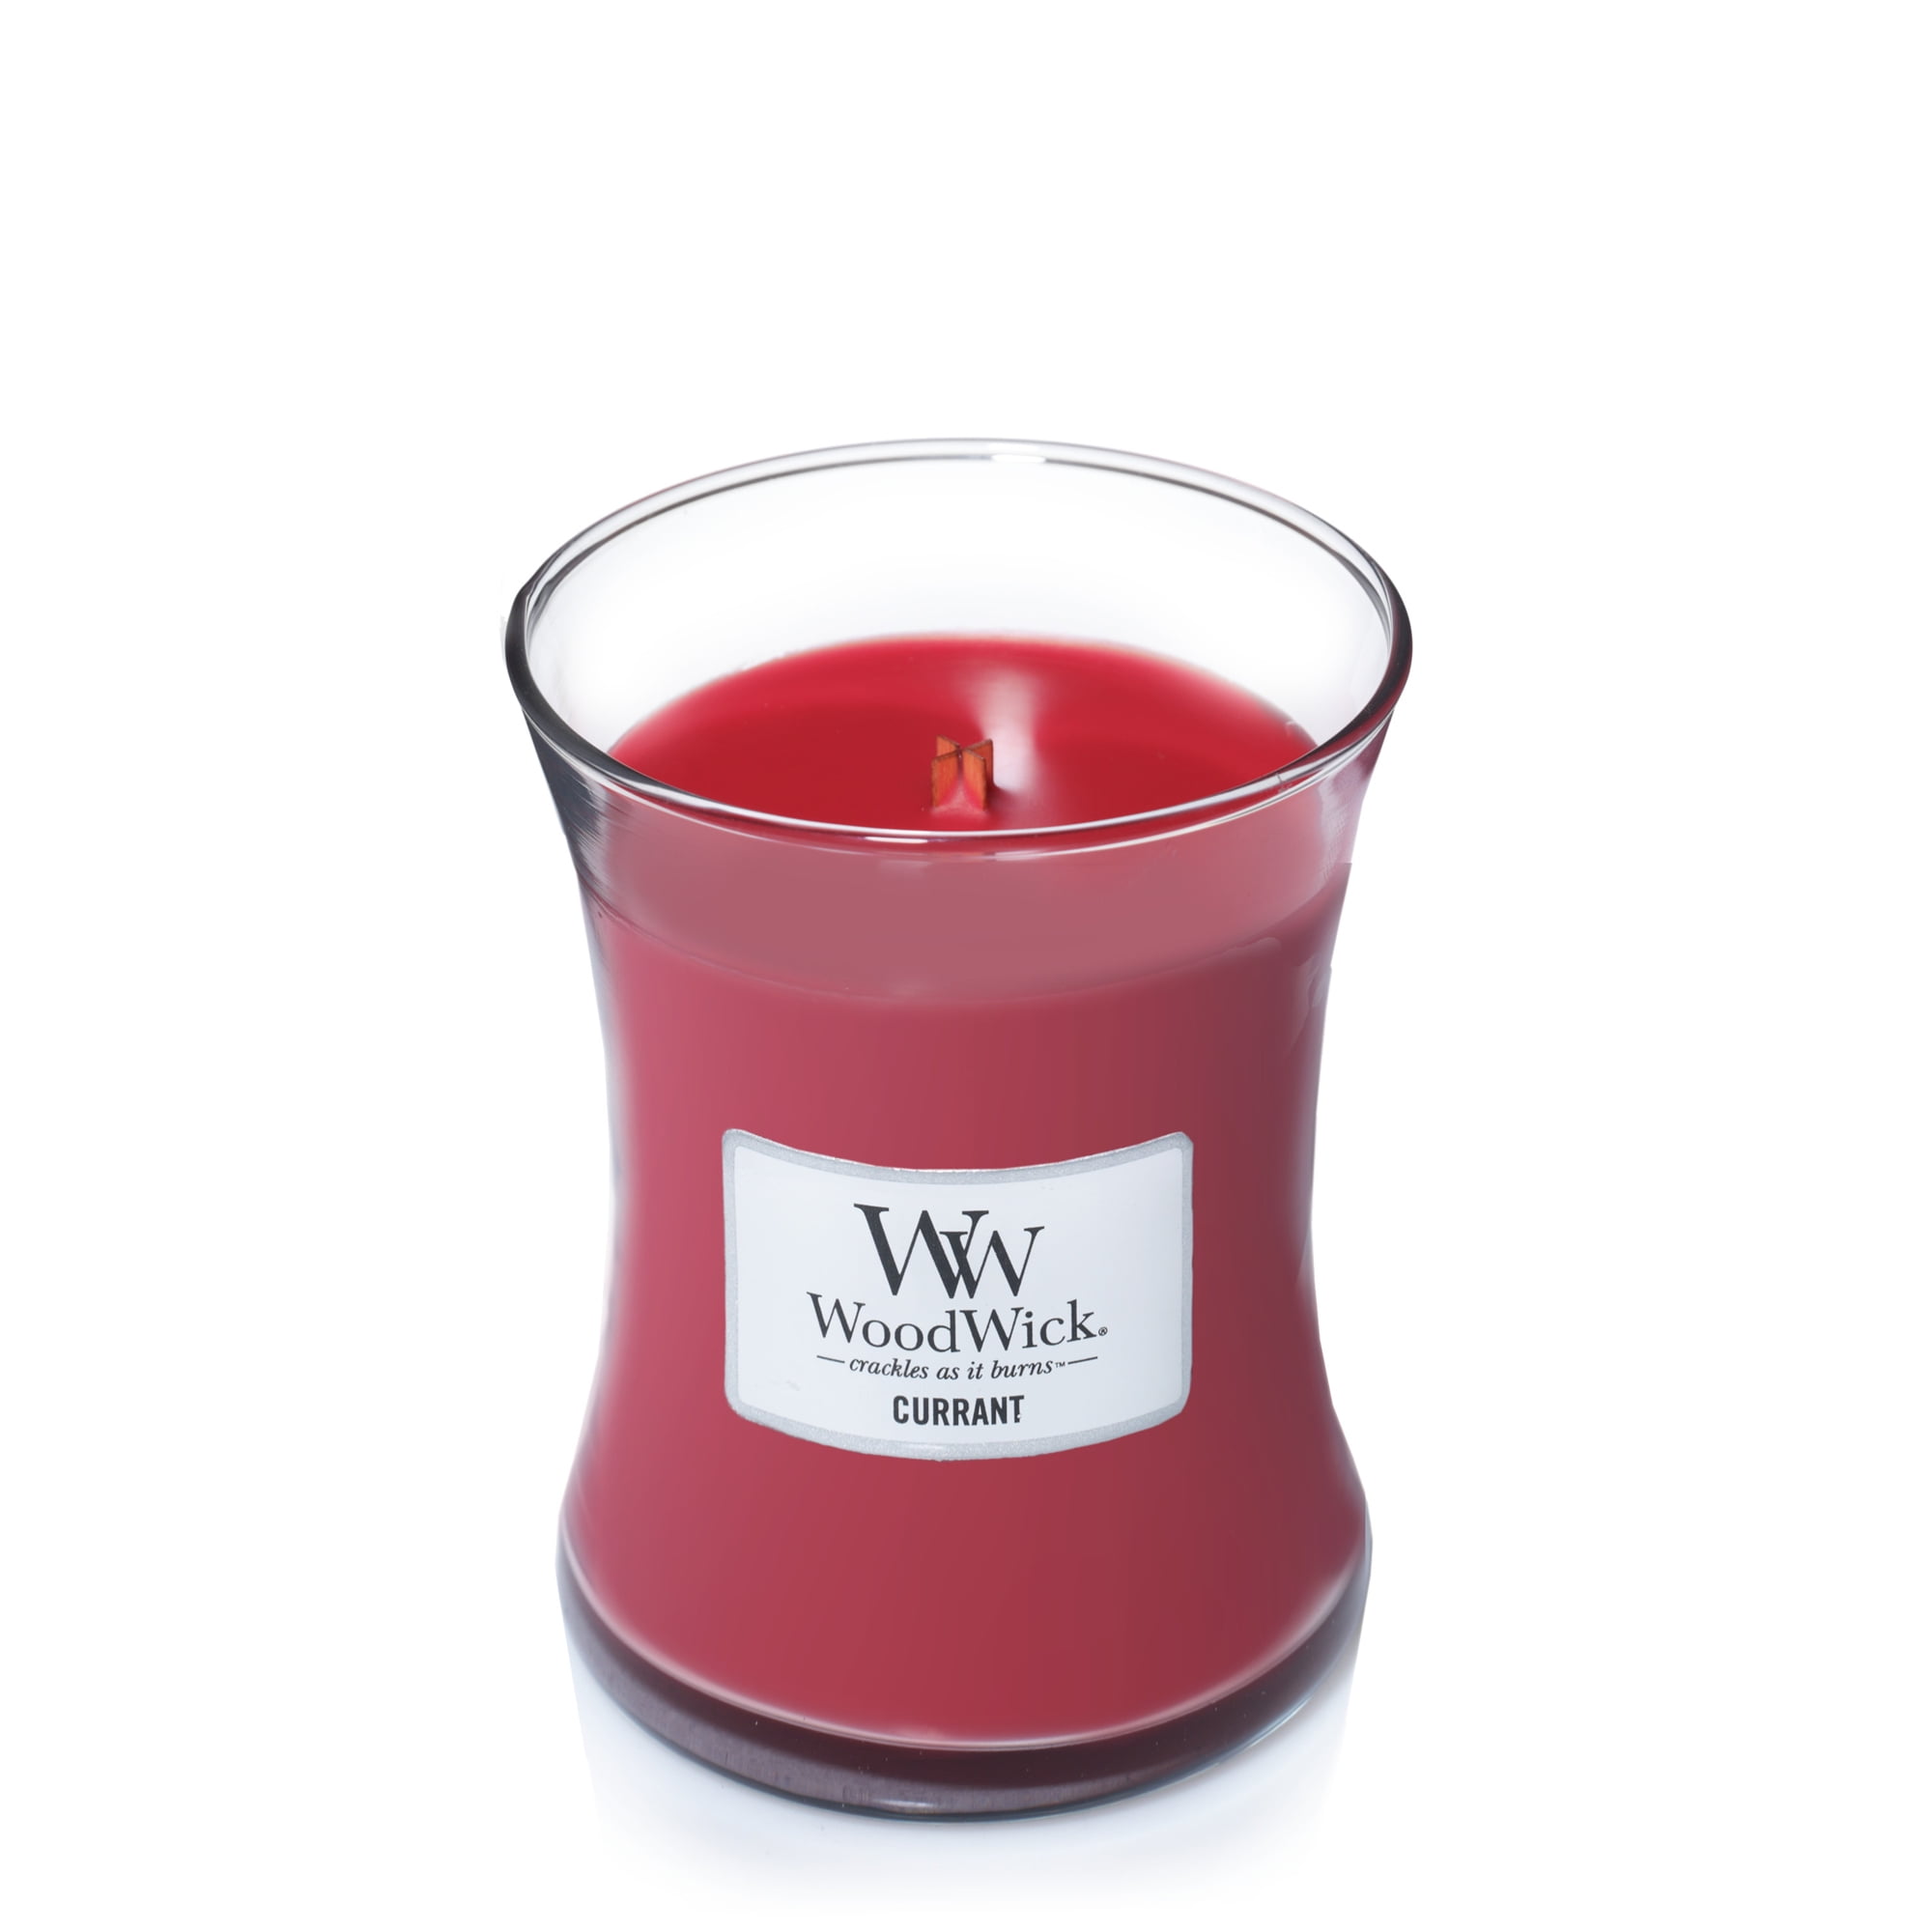 WoodWick Medium Hourglass Scented Candle, Currant